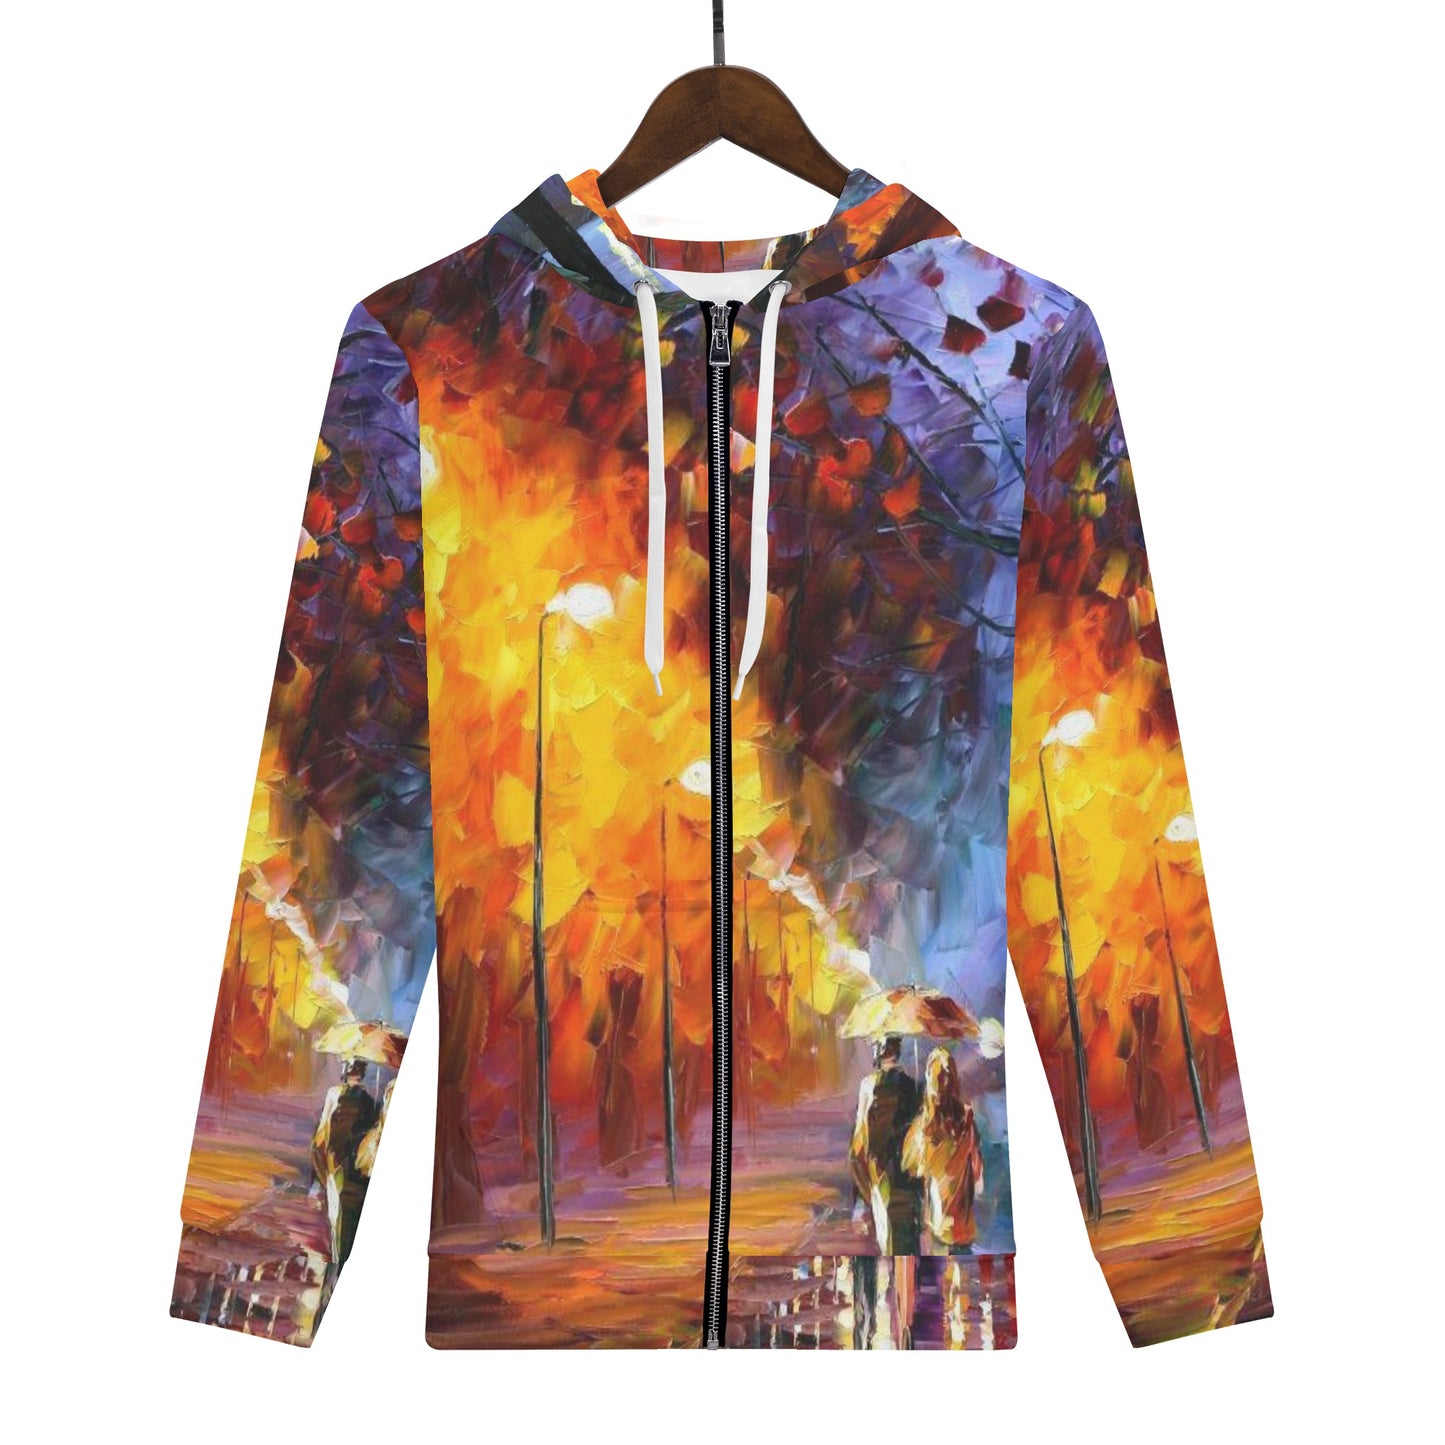 ALLEY BY THE LAKE Men's All Over Print Zip Hoodie